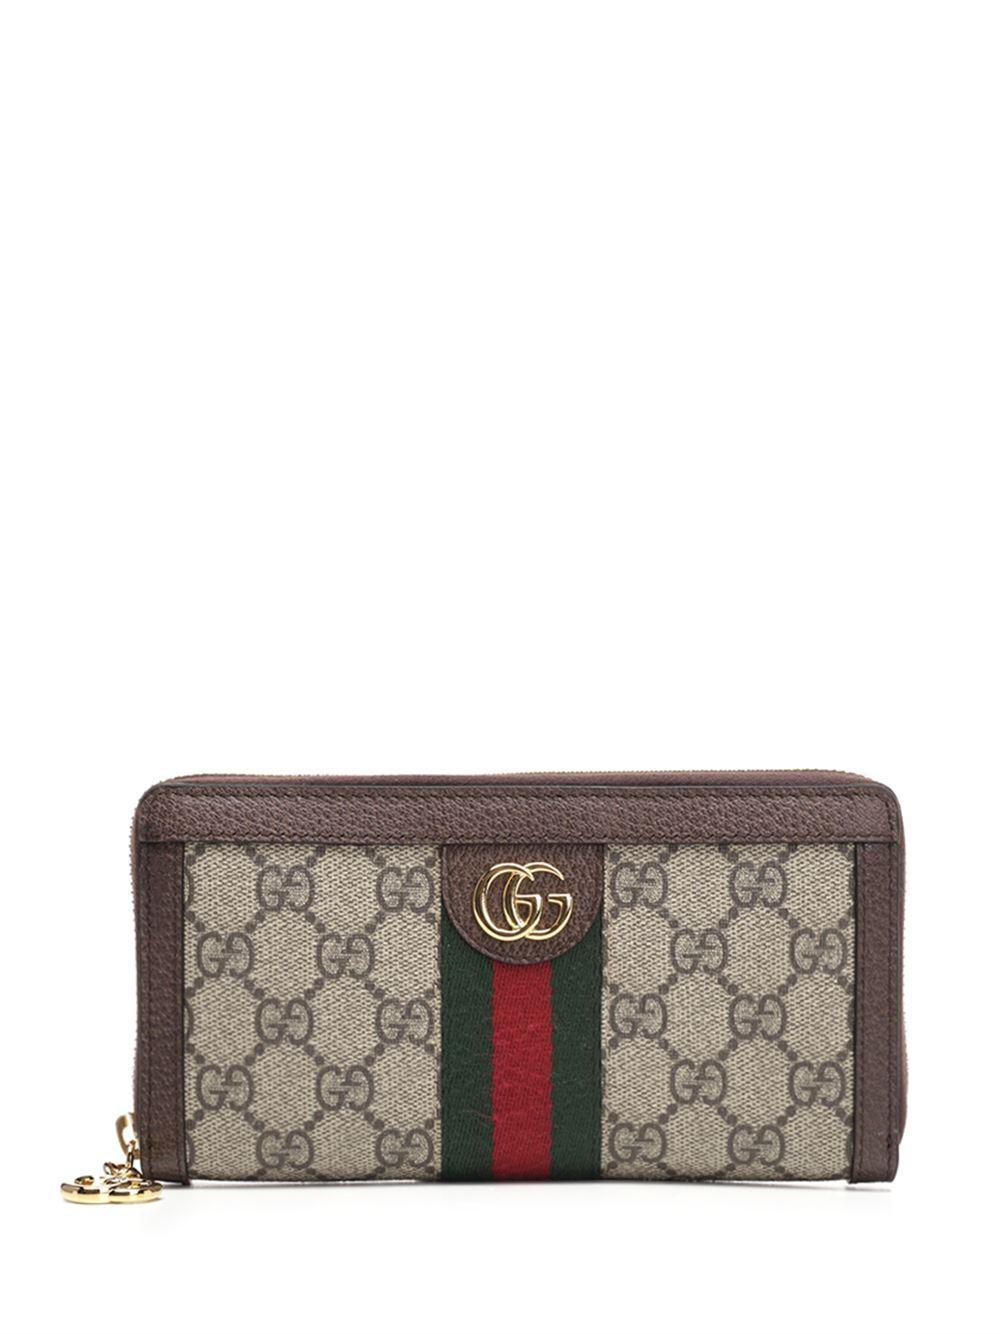 Gucci Synthetic Ophidia GG Zip Around Wallet in Brown - Lyst